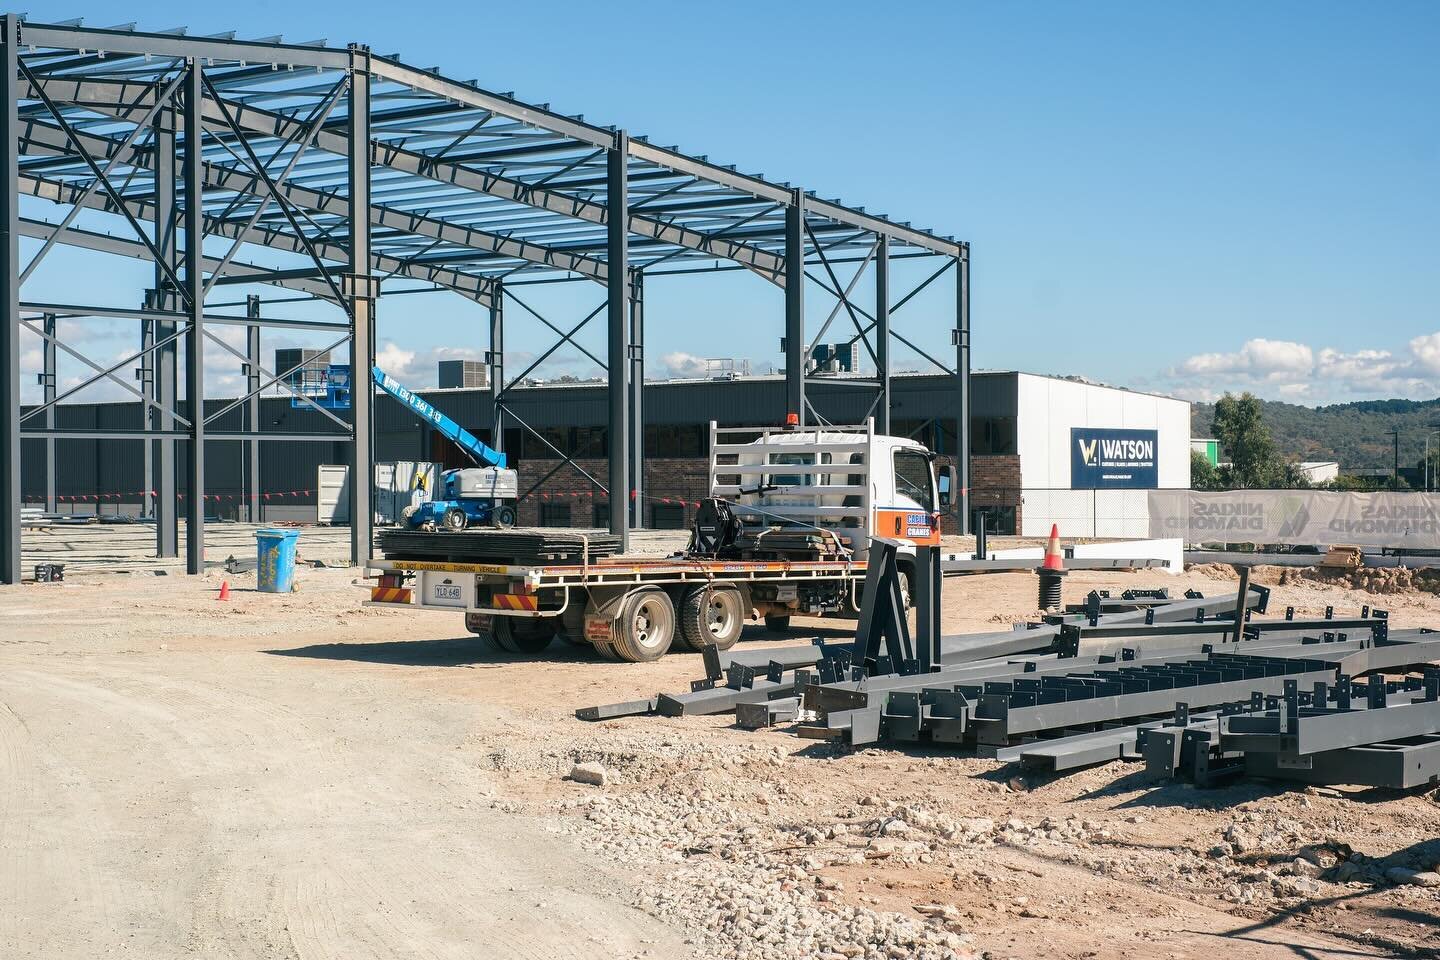 The ND team is excited to be back out in Hume working on a new warehouse project for a commercial client 🏗

The steel frame and foundations of this 5,500sqm build are currently being installed, with the internal stages of the project expected to beg